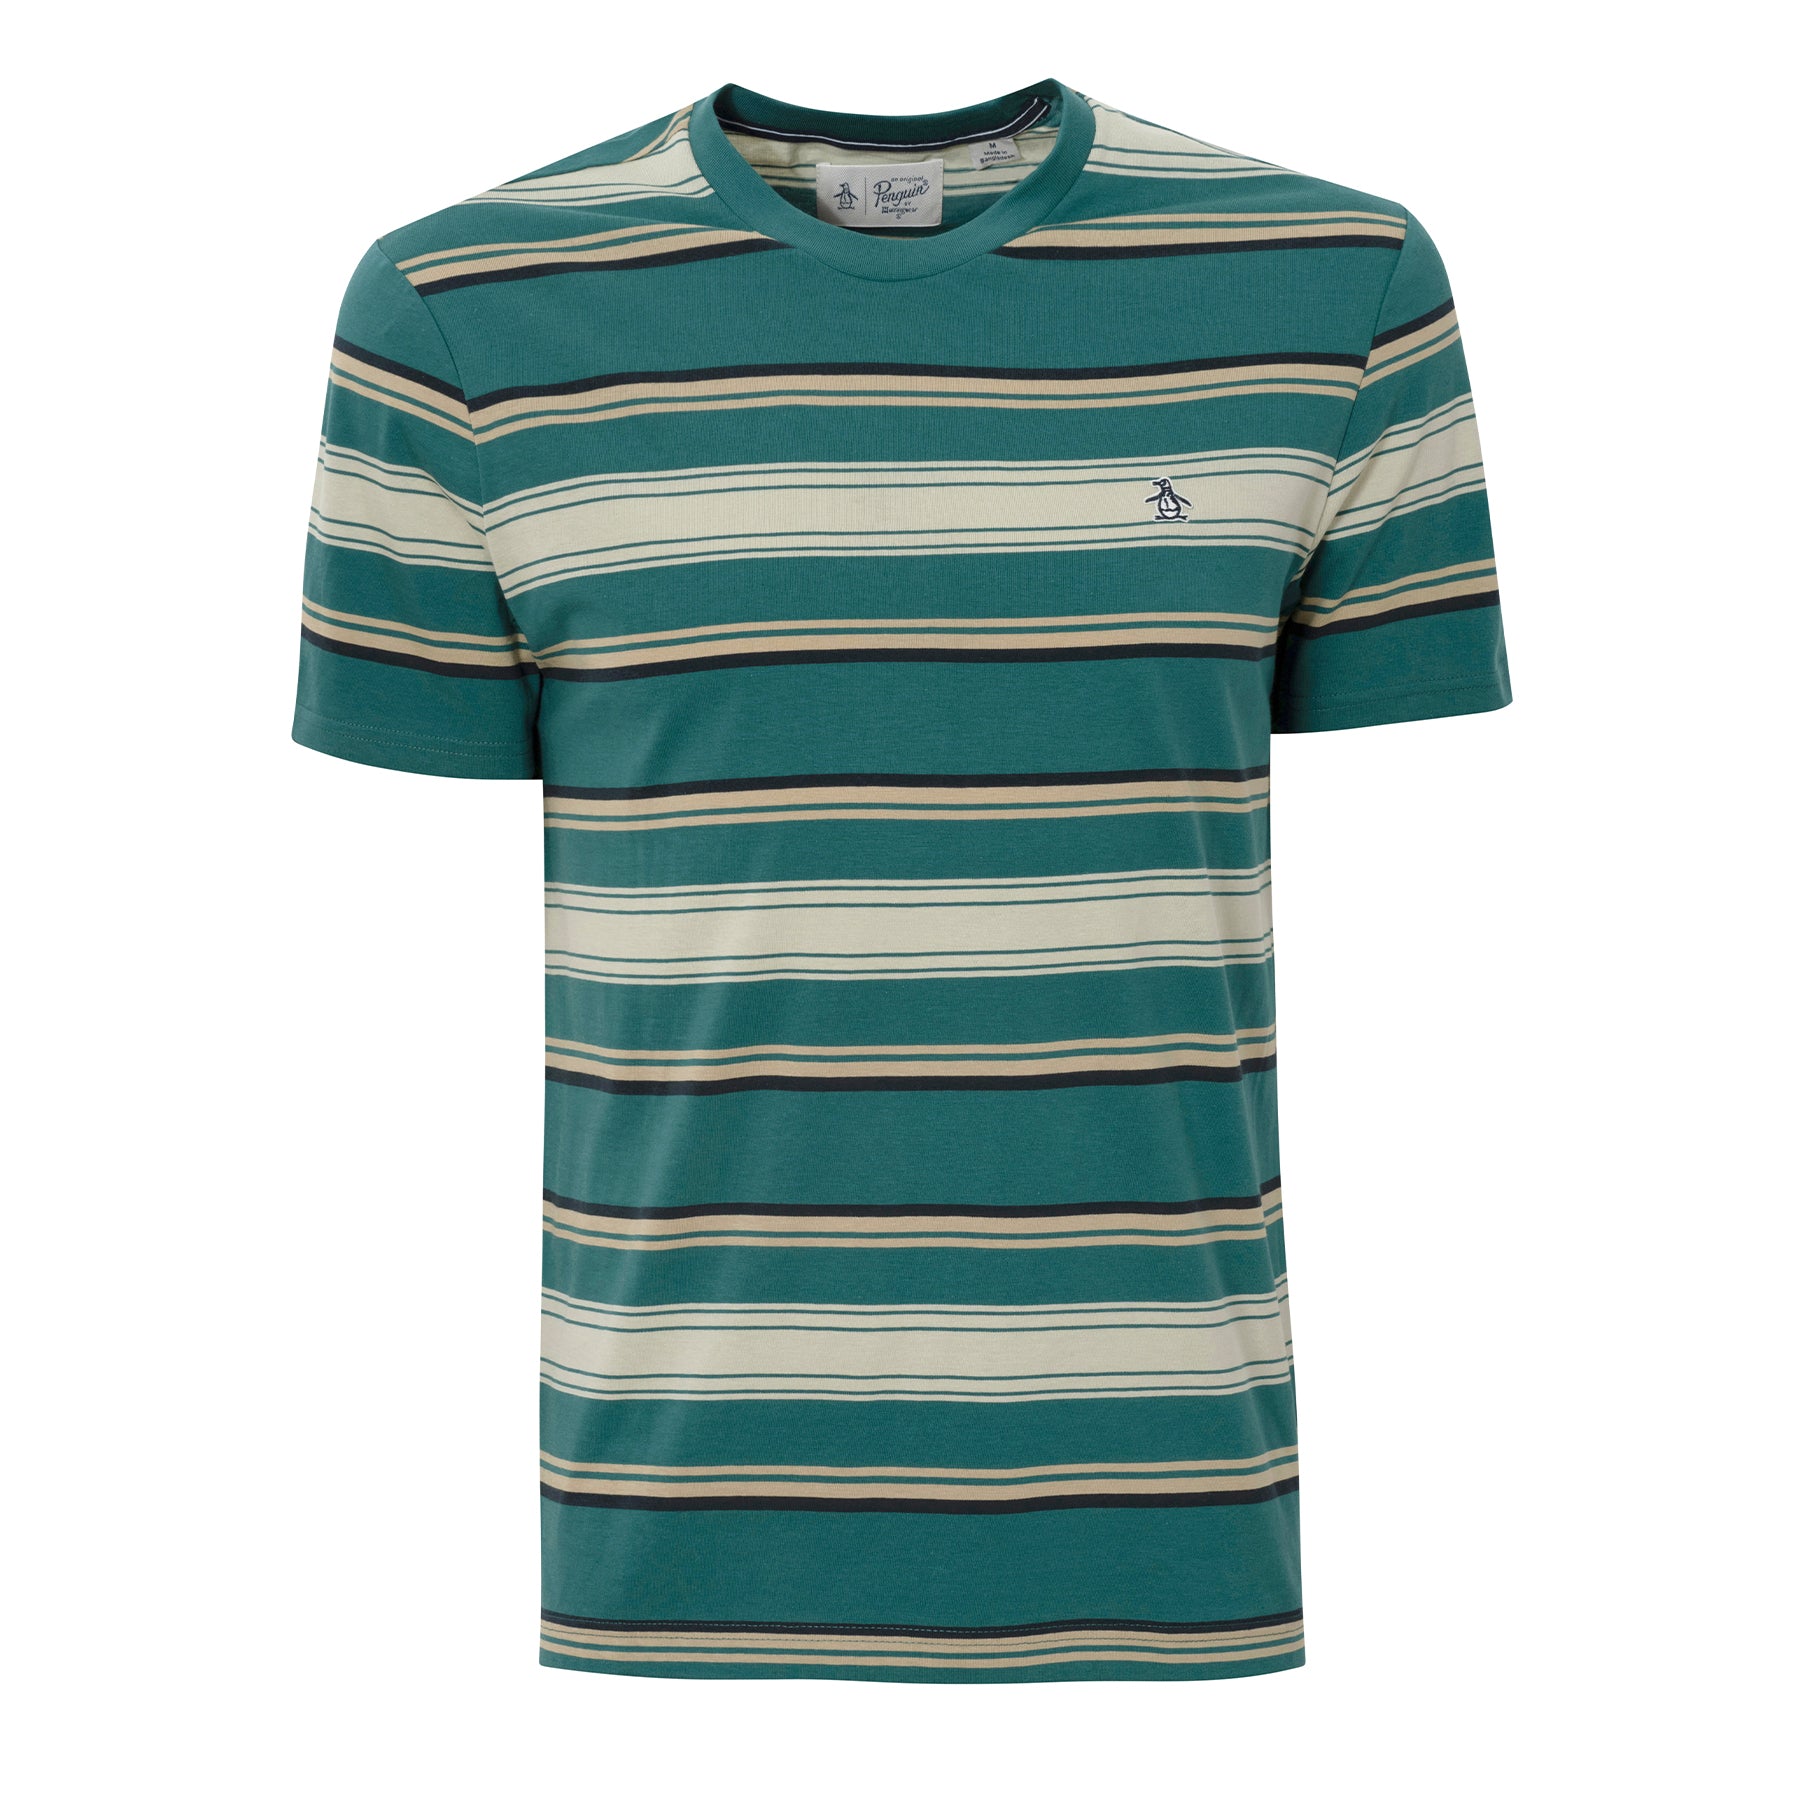 View Slim Fit Jersey Striped TShirt In Pacific information